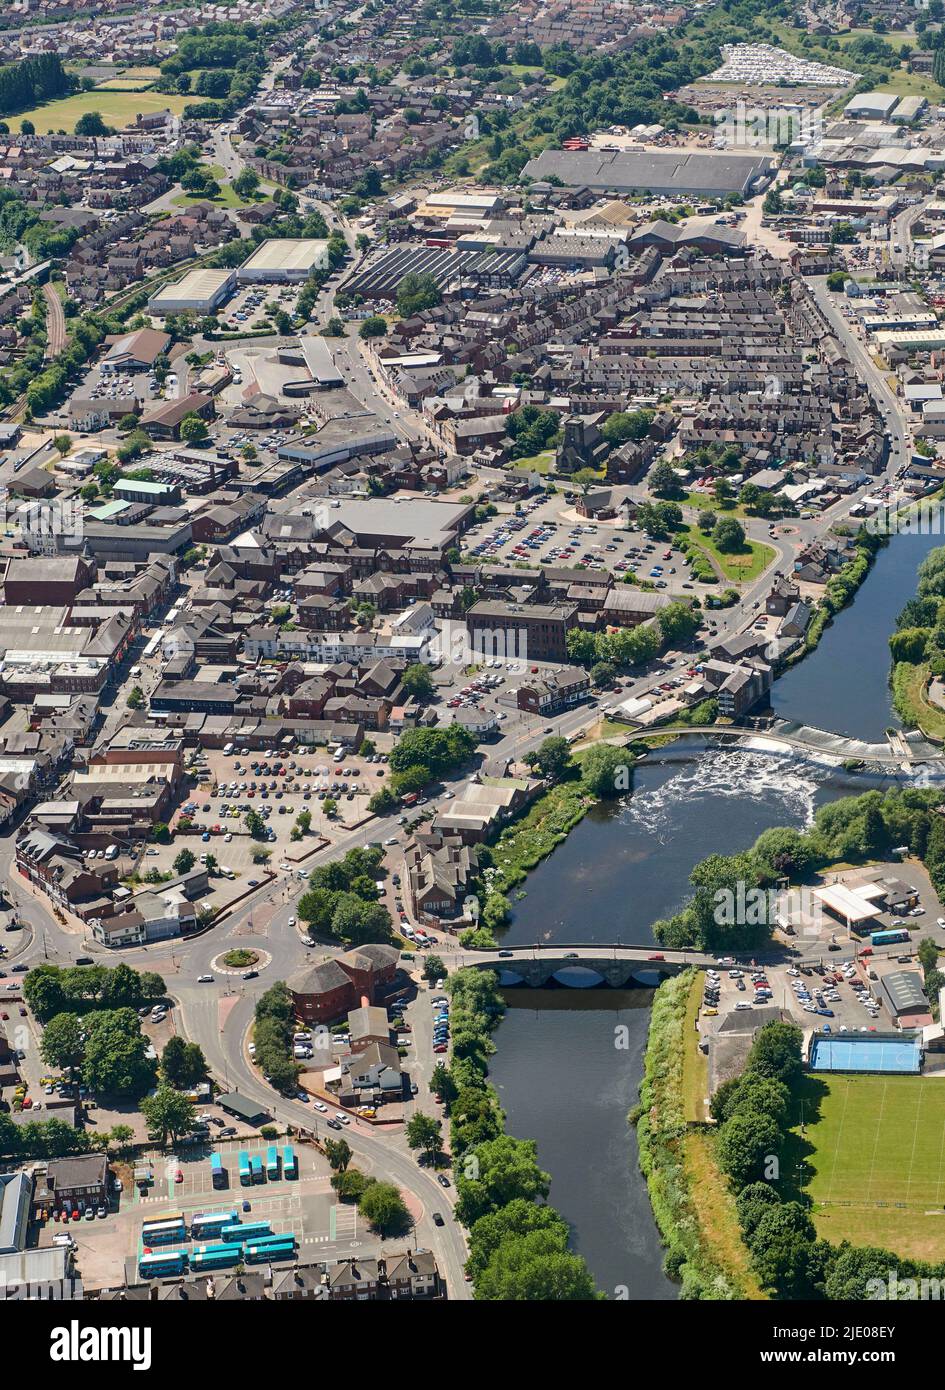 An aerial view of castleford, West Yorkshire, northern England, UK showing the river Aire, and new housing developments Stock Photo